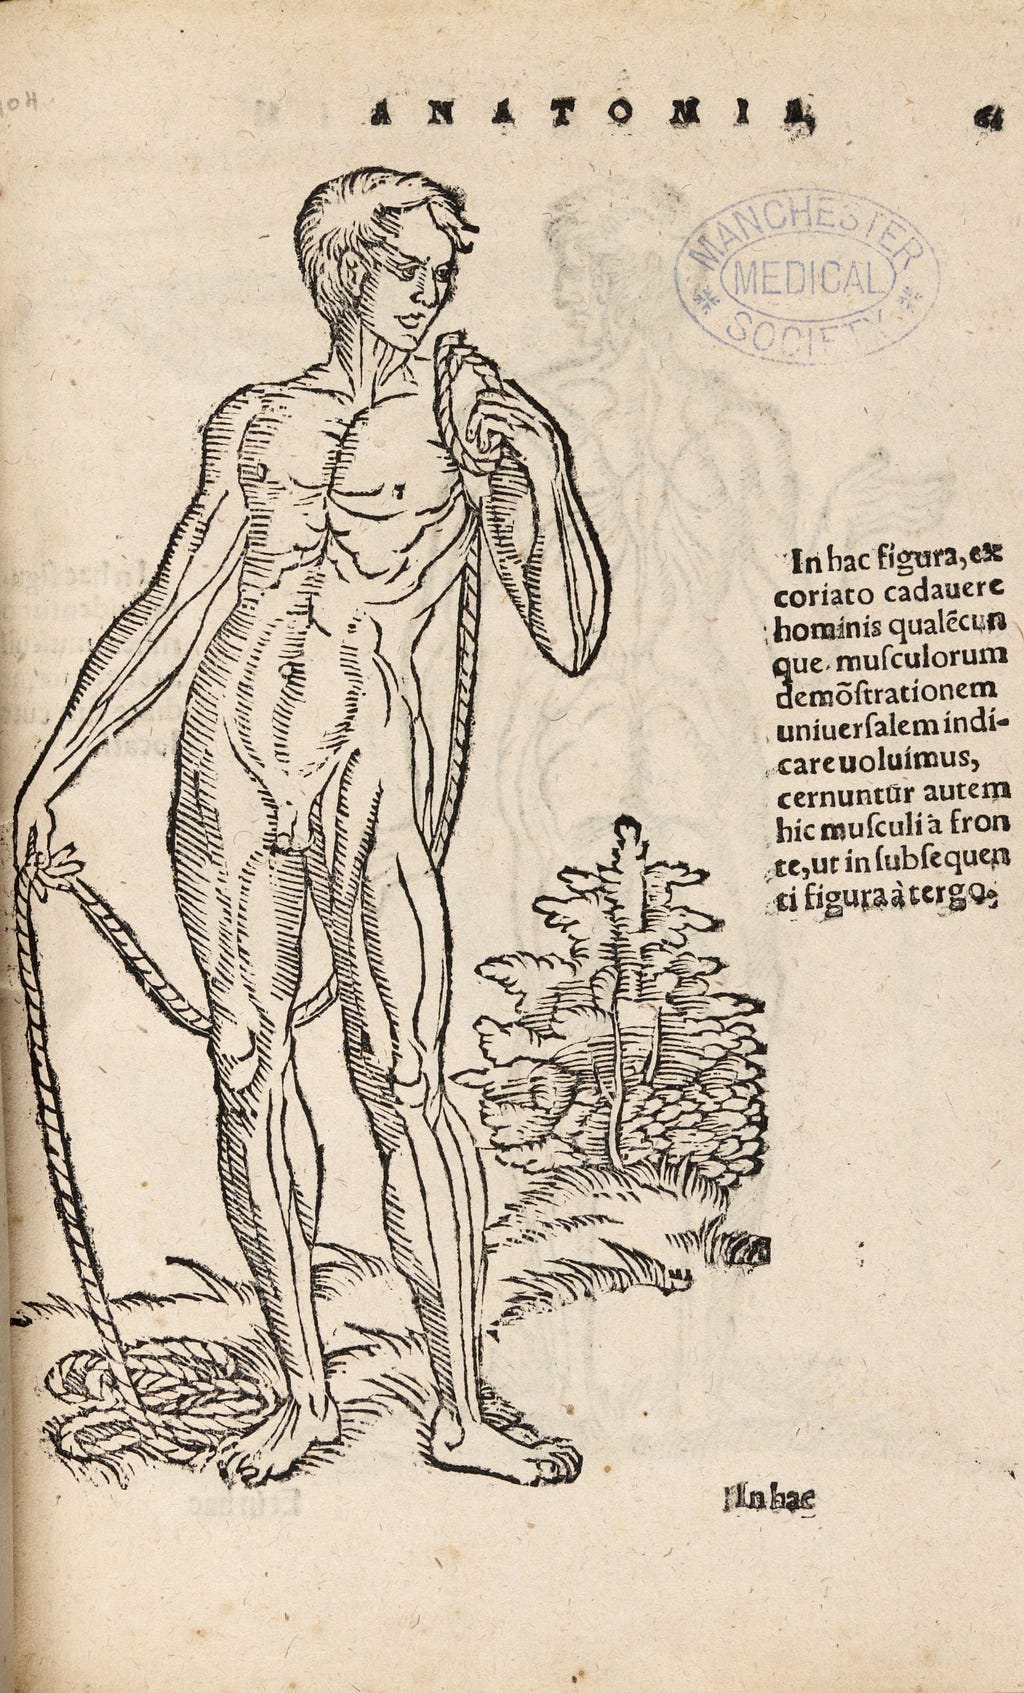 An anatomical drawing of a naked man stood next to a small tree holding a rope. There is a description in Latin to accompany the image as well as a Manchester Medical Society stamp.